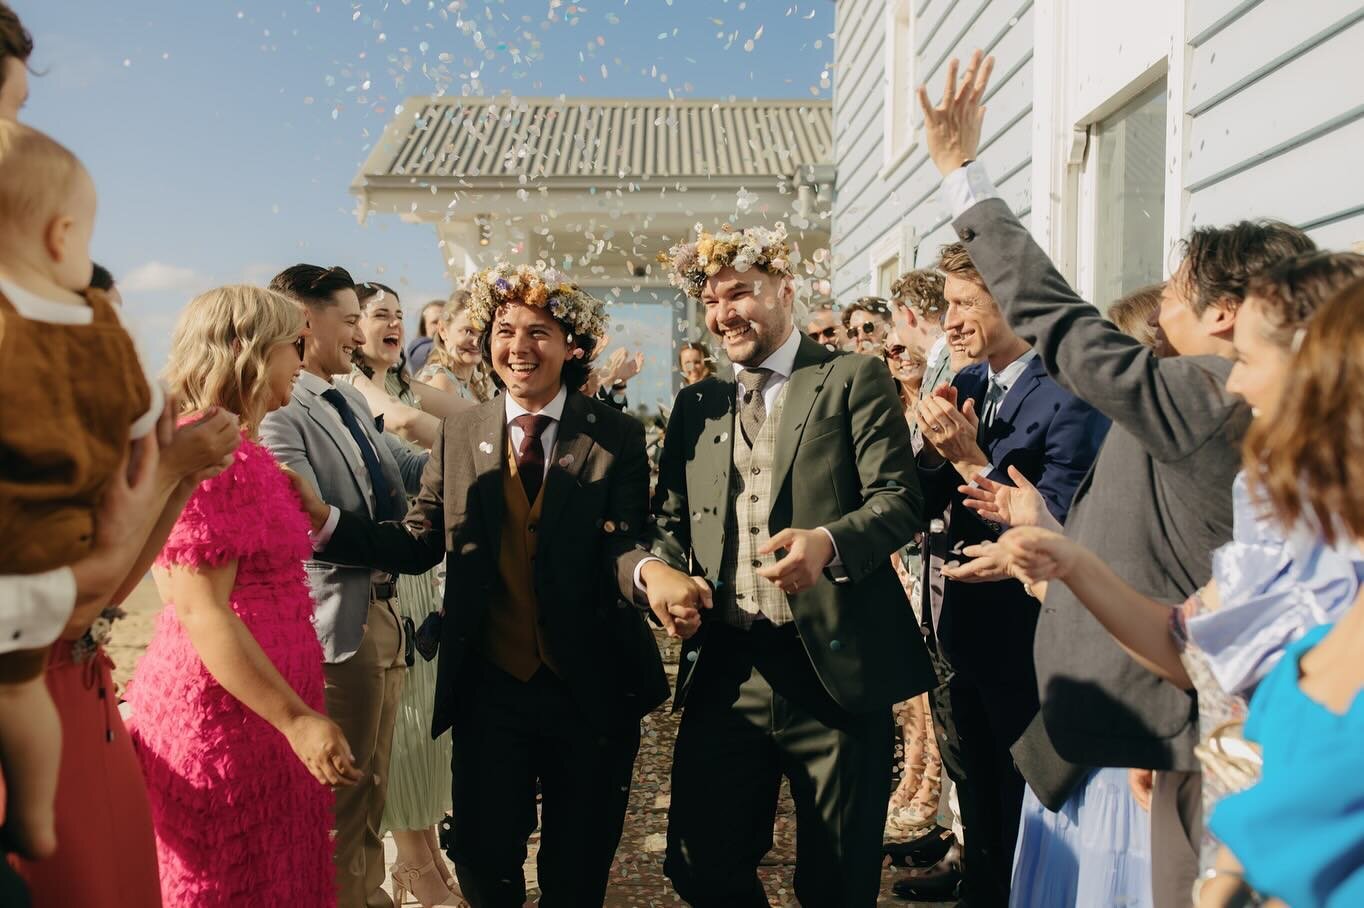 I am utterly DECEASED😭😭🥹 Jack &amp; Izaak&rsquo;s day was the indie/romcom/musical wedding of my dreams❤️❤️My heart is so full for these two and their soul-stirring effervescent love story - I have not yet recovered from the overwhelming beauty of